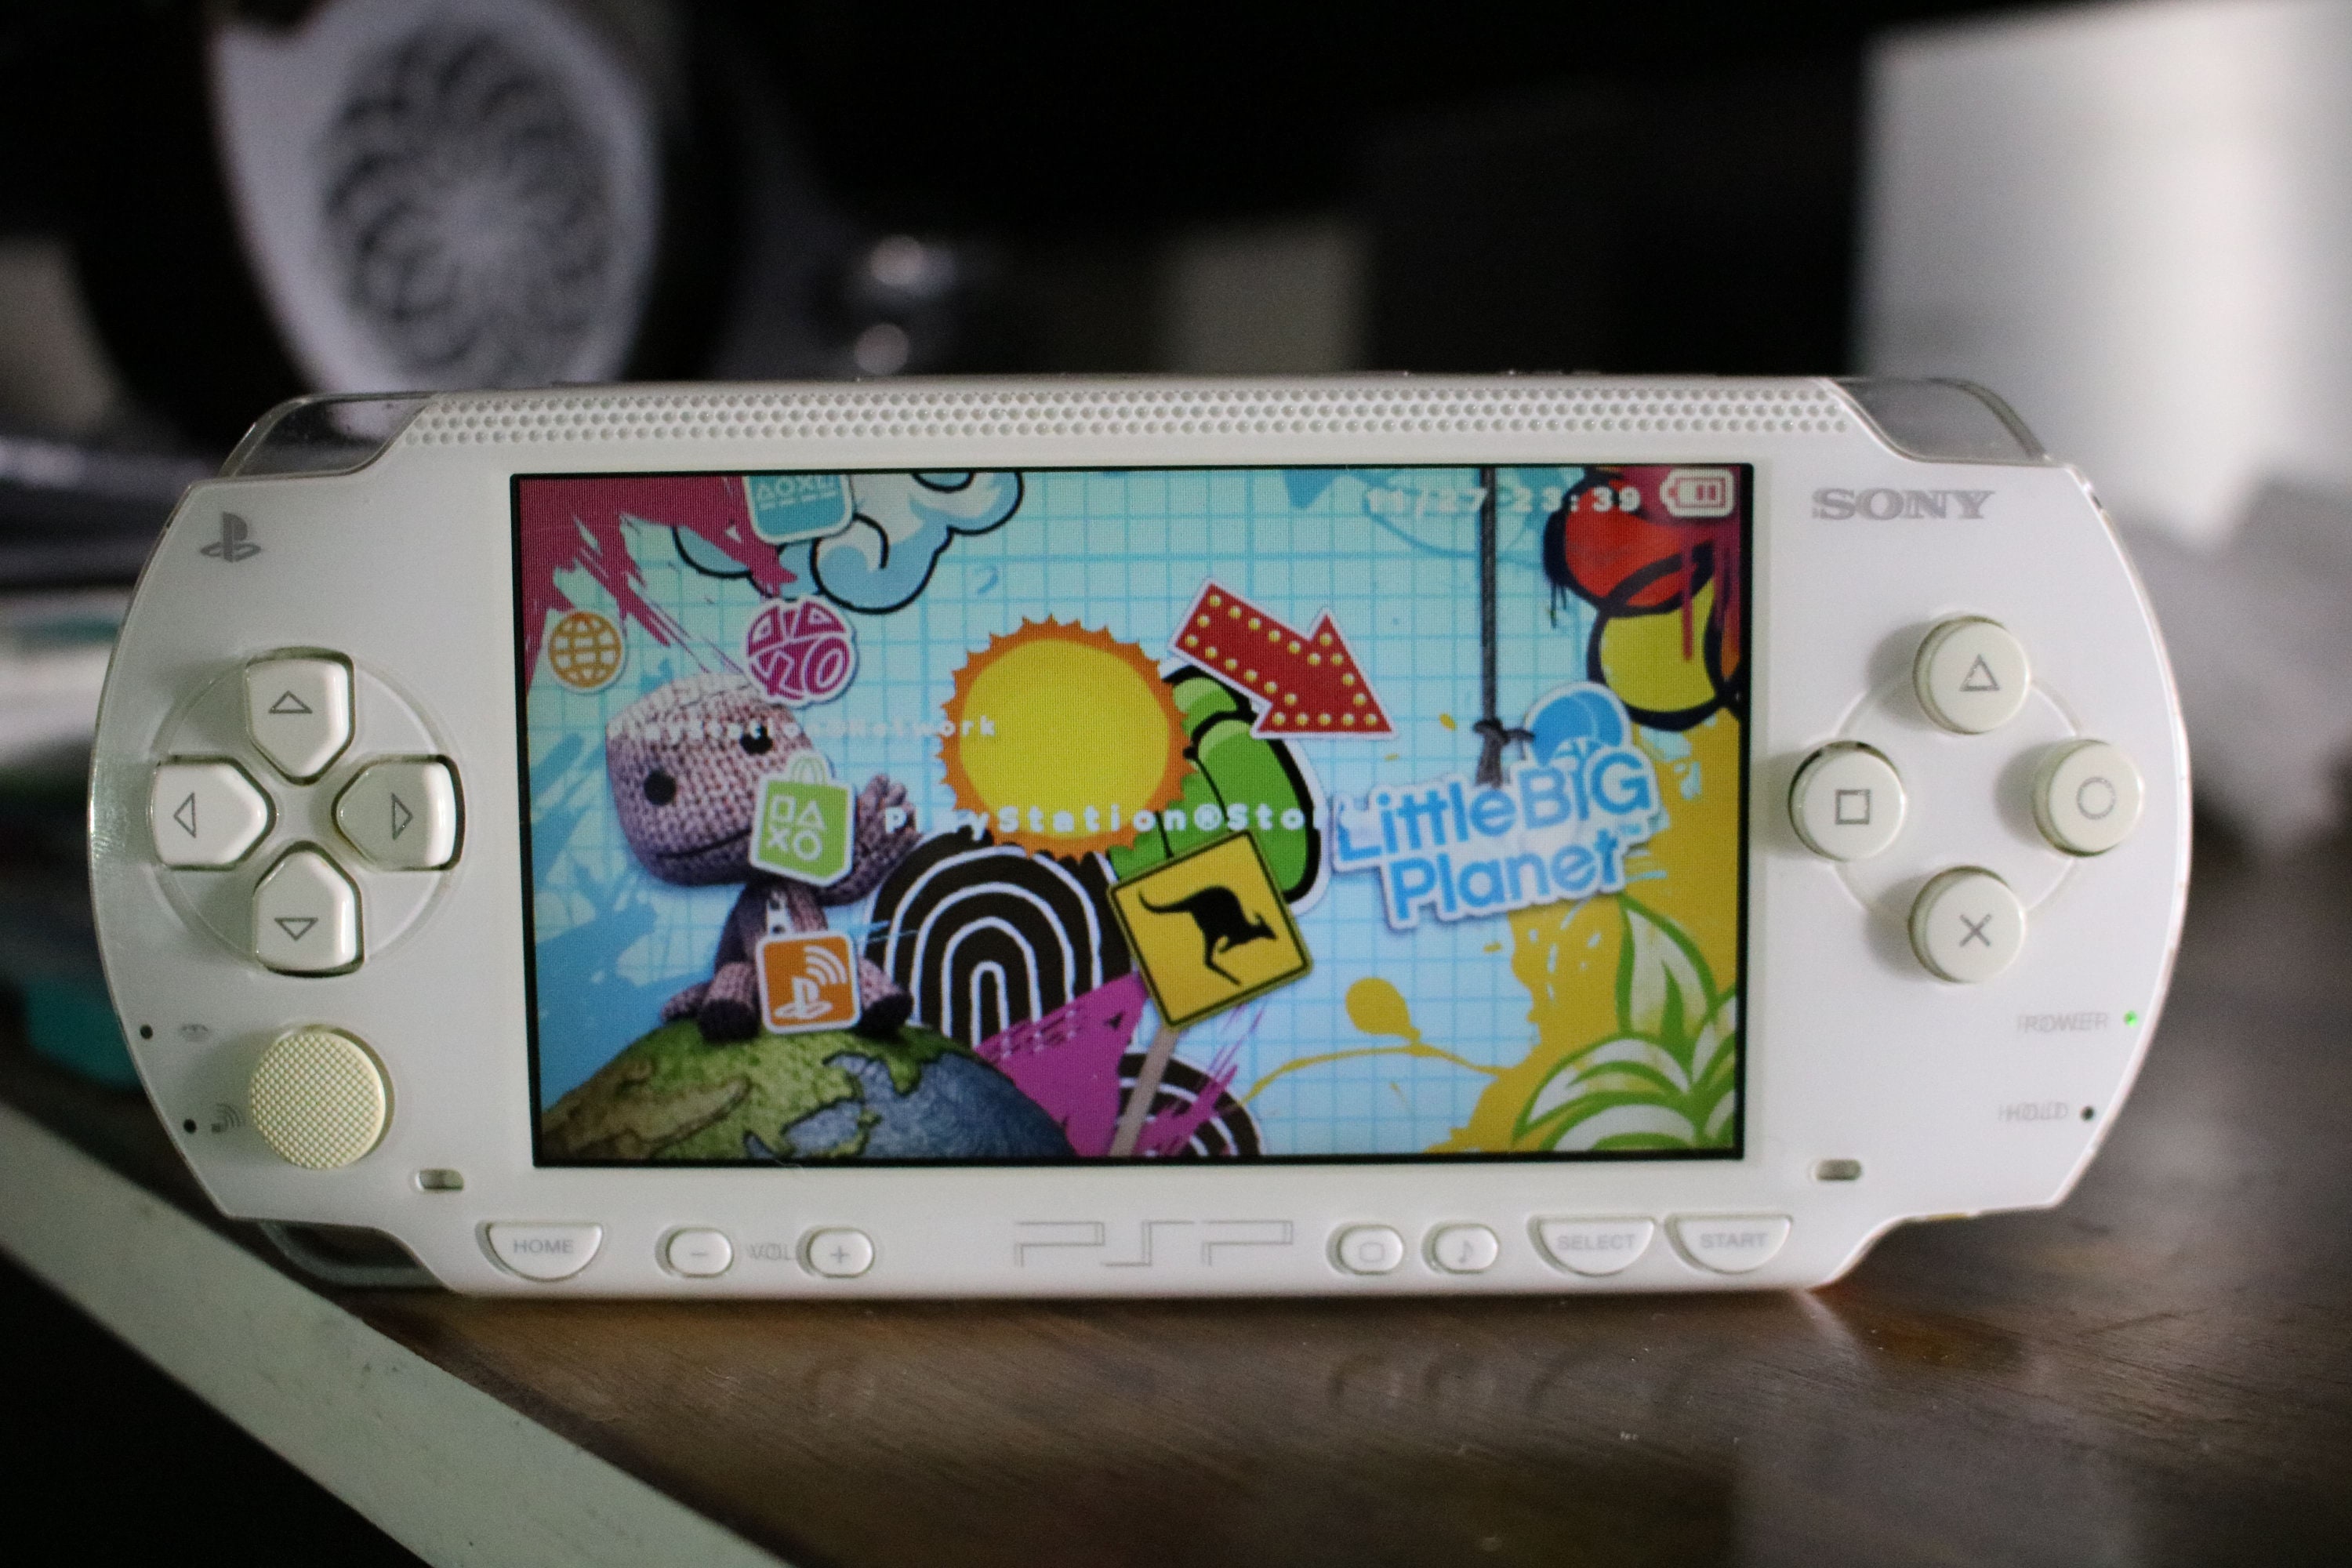 Sony PSP 1000. 6.61 CFW Mod. 64gb. Charger and Battery Etsy Finland